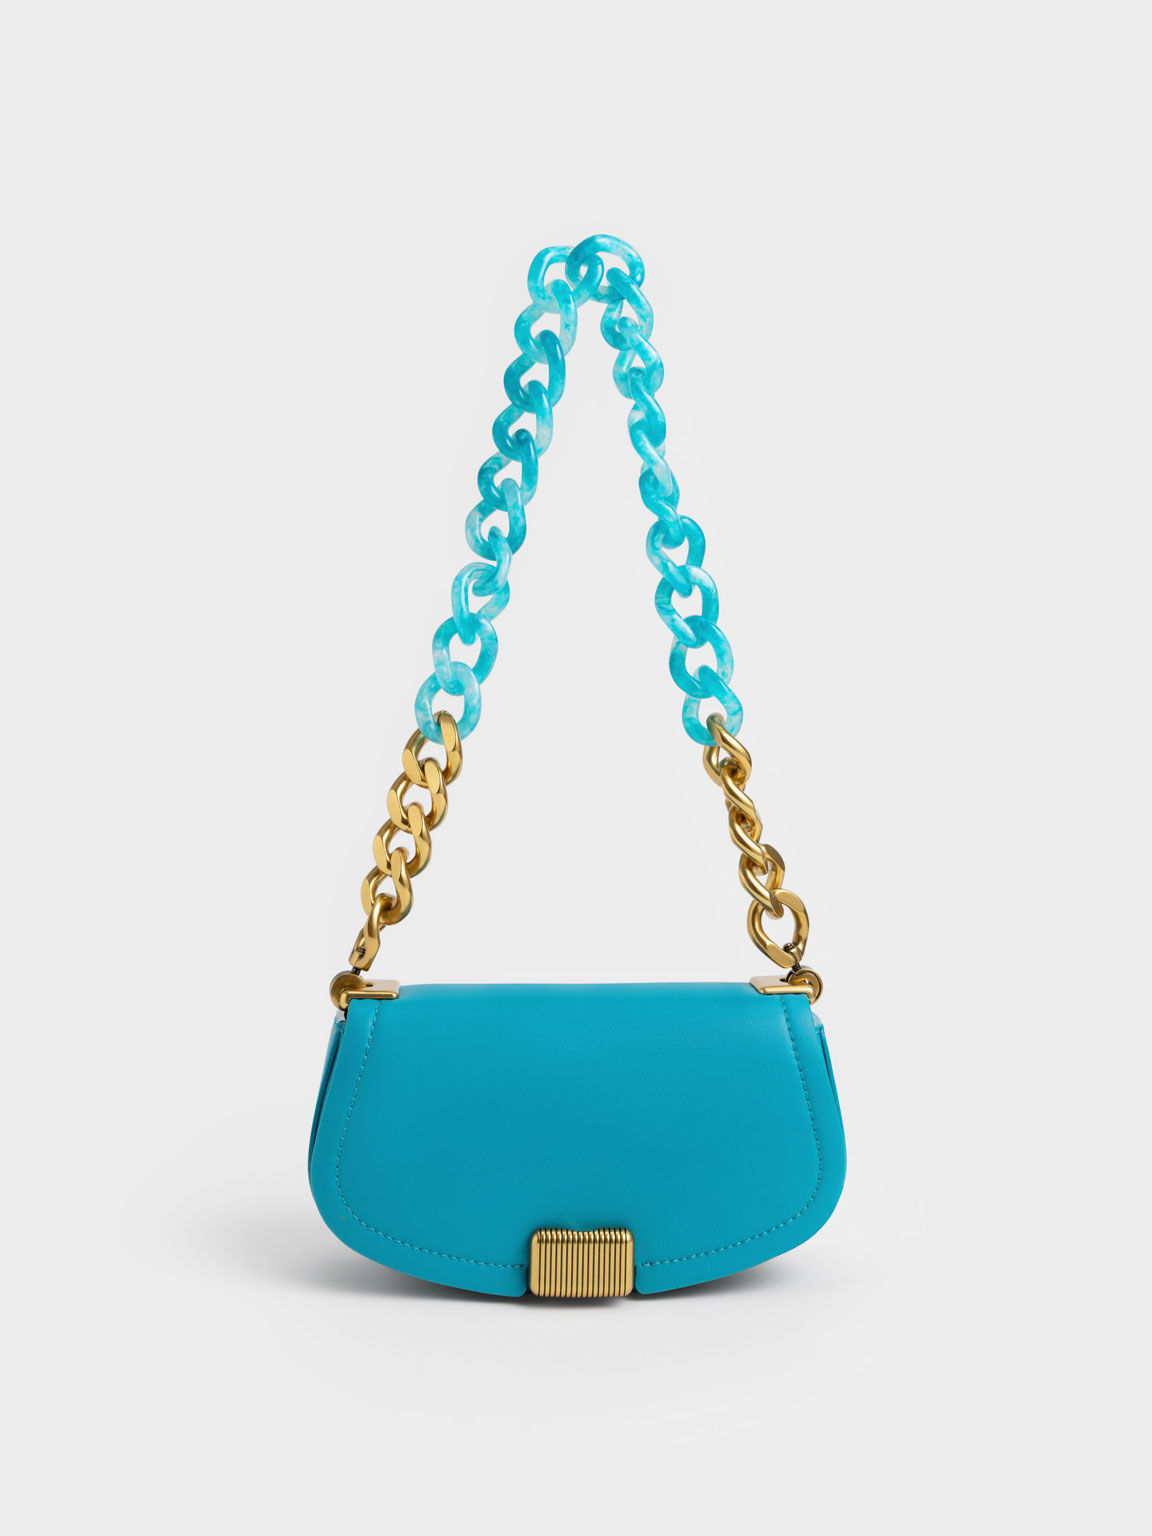 Bright Colors | Chain Handle Bags & Low-Top Sneakers - CHARLES 